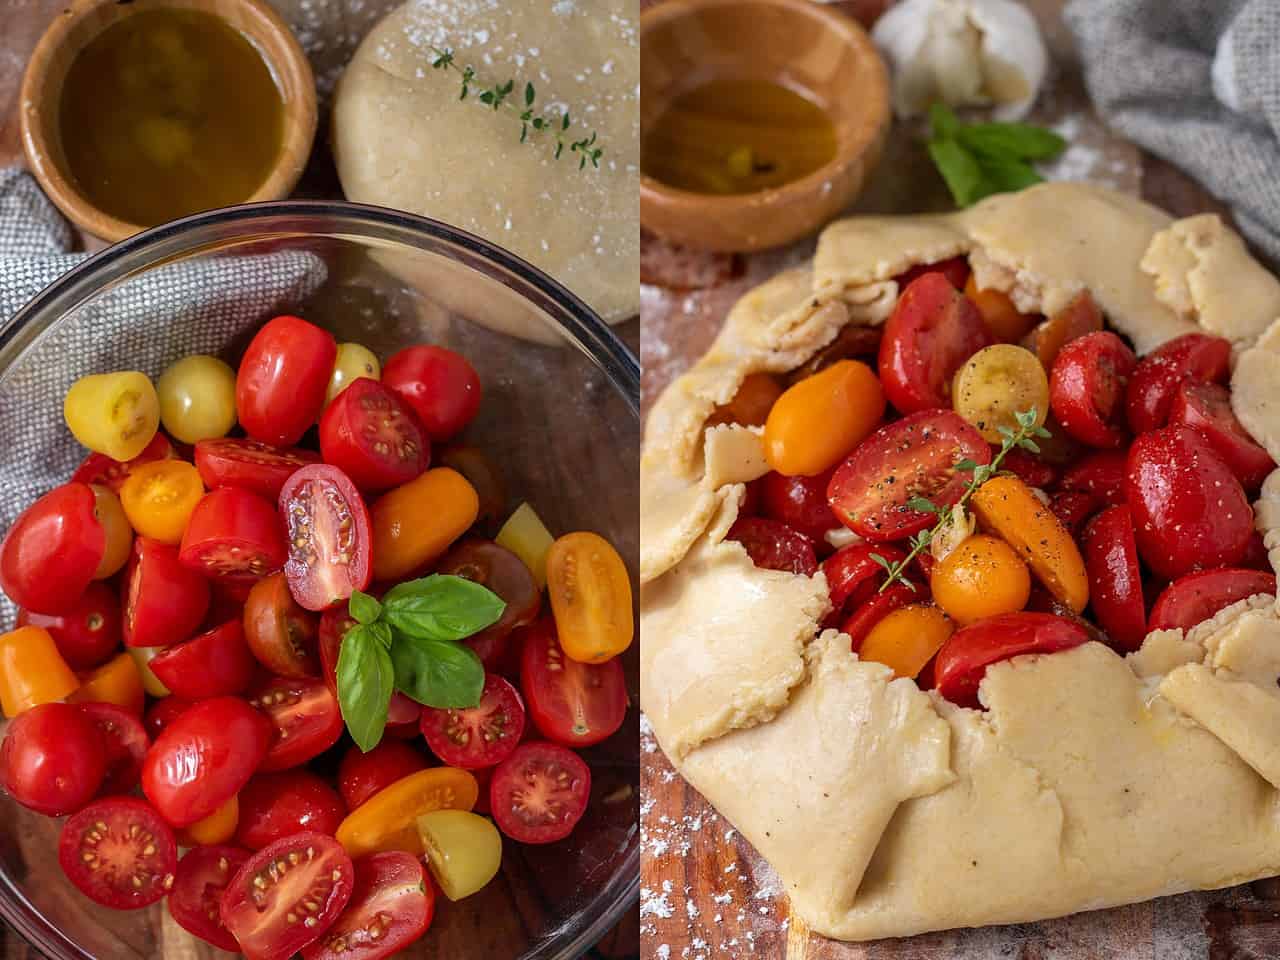 A side by side of two pictures: the first a big bowl of colorful halved cherry tomatoes with a disc of pie dough, a sprig of fresh thyme and some olive oil in the background. The second picture is of the cherry tomato crostata before being baked.